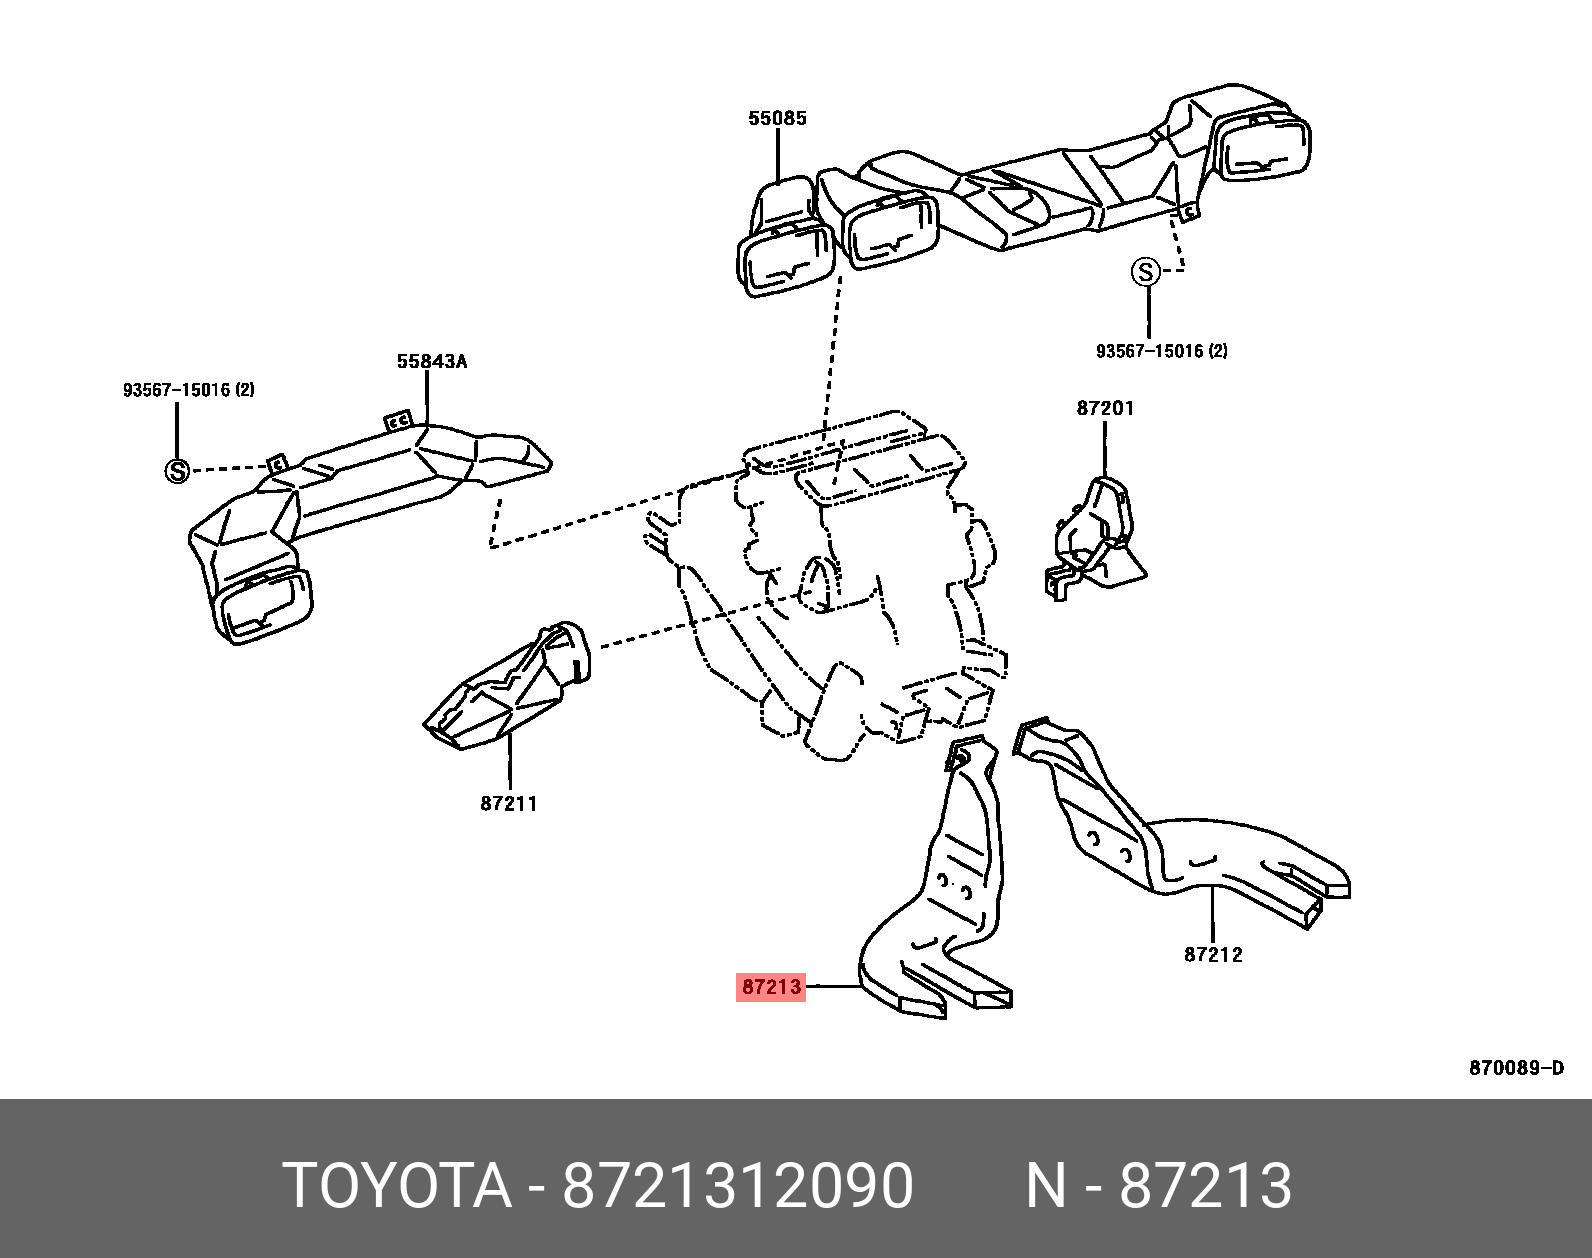 PRIUS (PLUG-IN) LEASE 200912 - 201010, DUCT, AIR, REAR NO.2